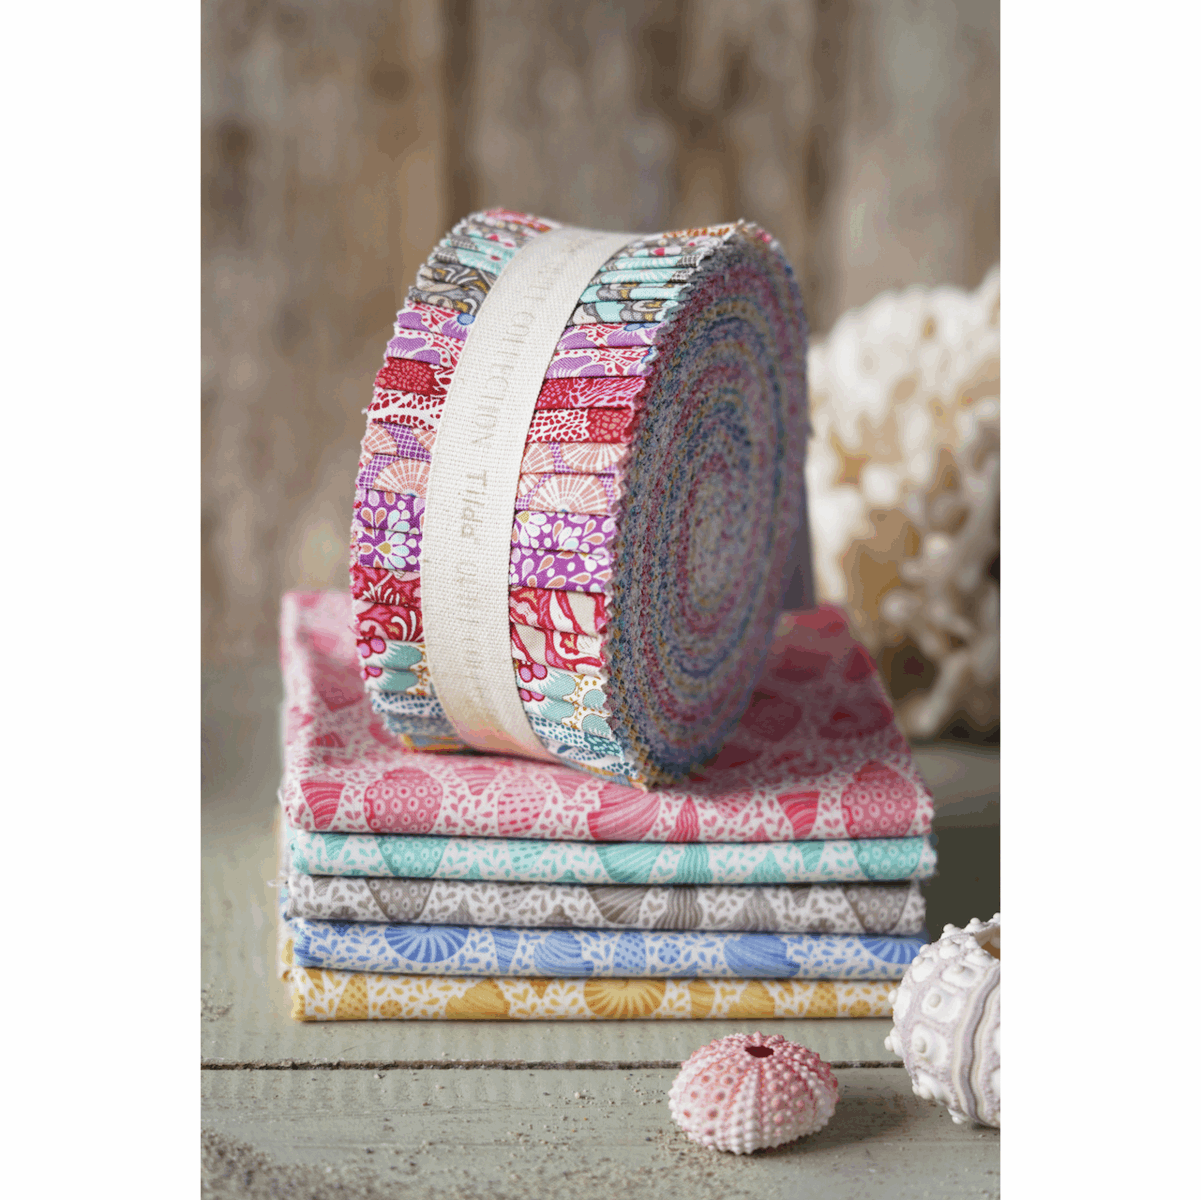 Fabric Roll - Cotton Beach Collection from Tilda 40pcs